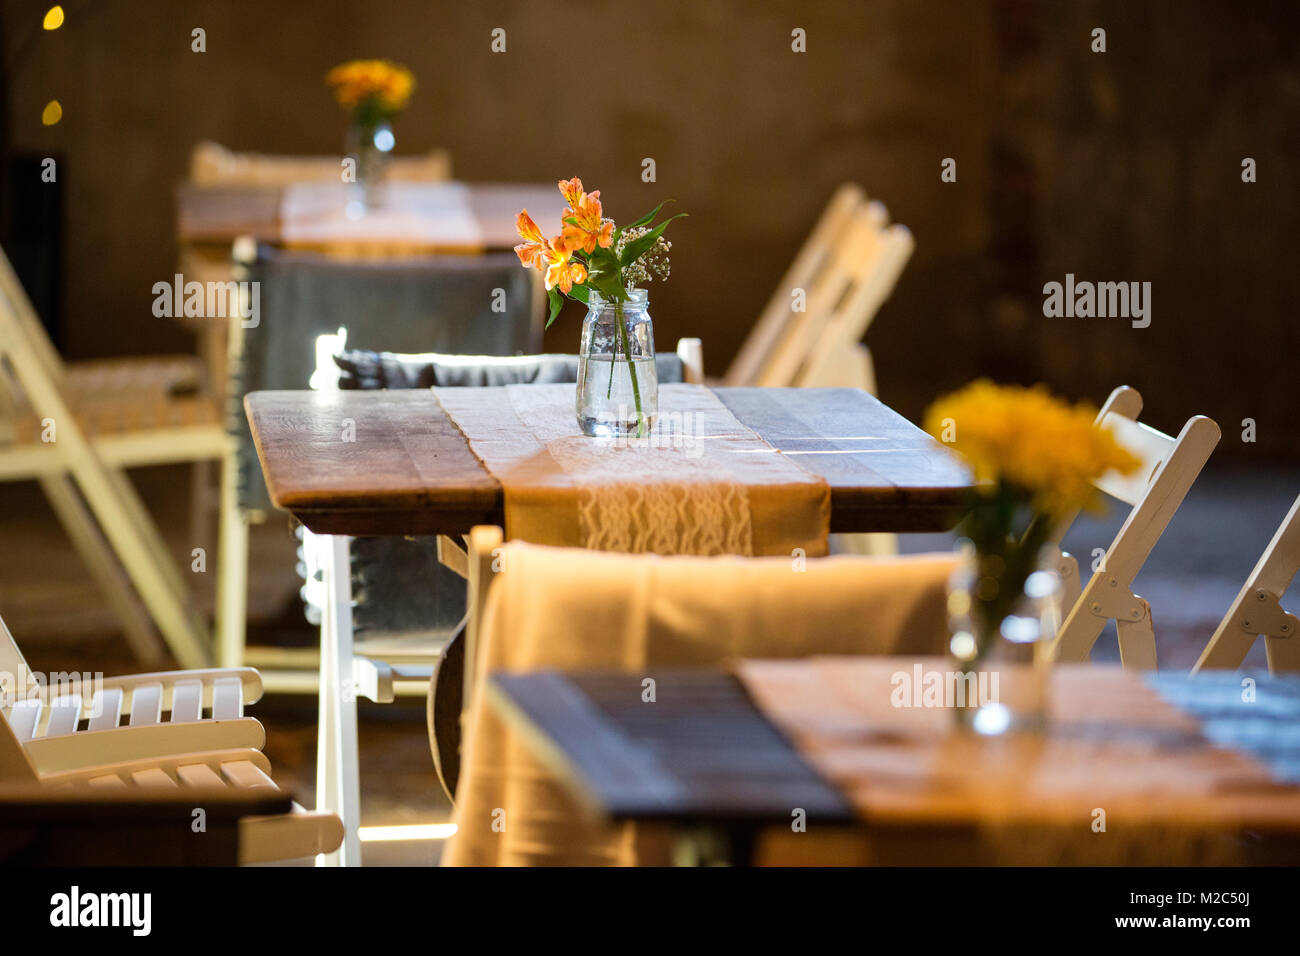 Tables set with vases of flowers Stock Photo